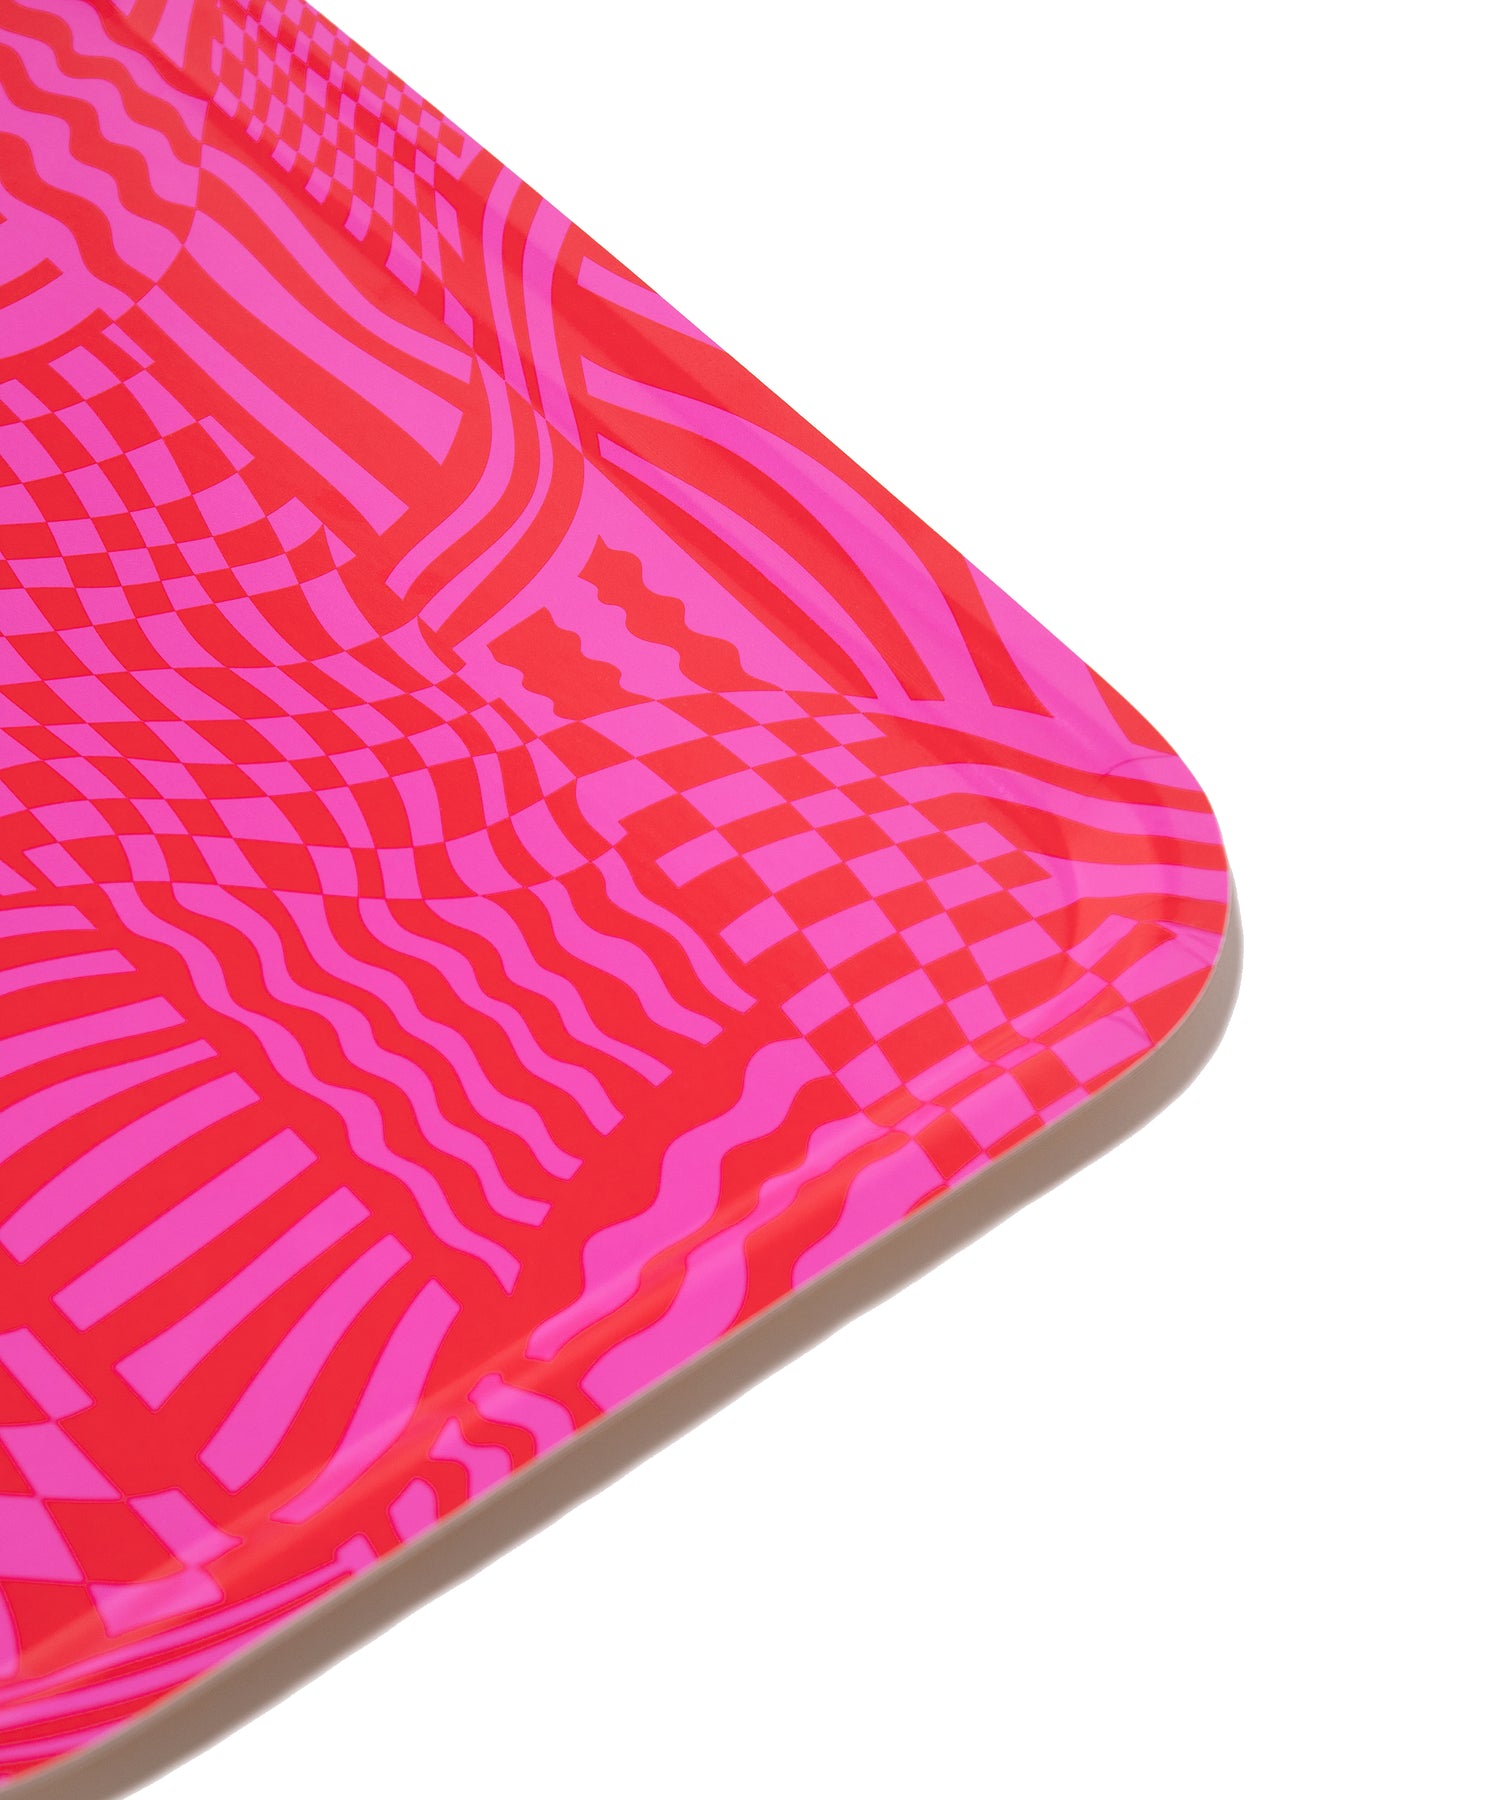 Corner detail of the Wiggles and Waves Tray showing the pink and red abstract design.